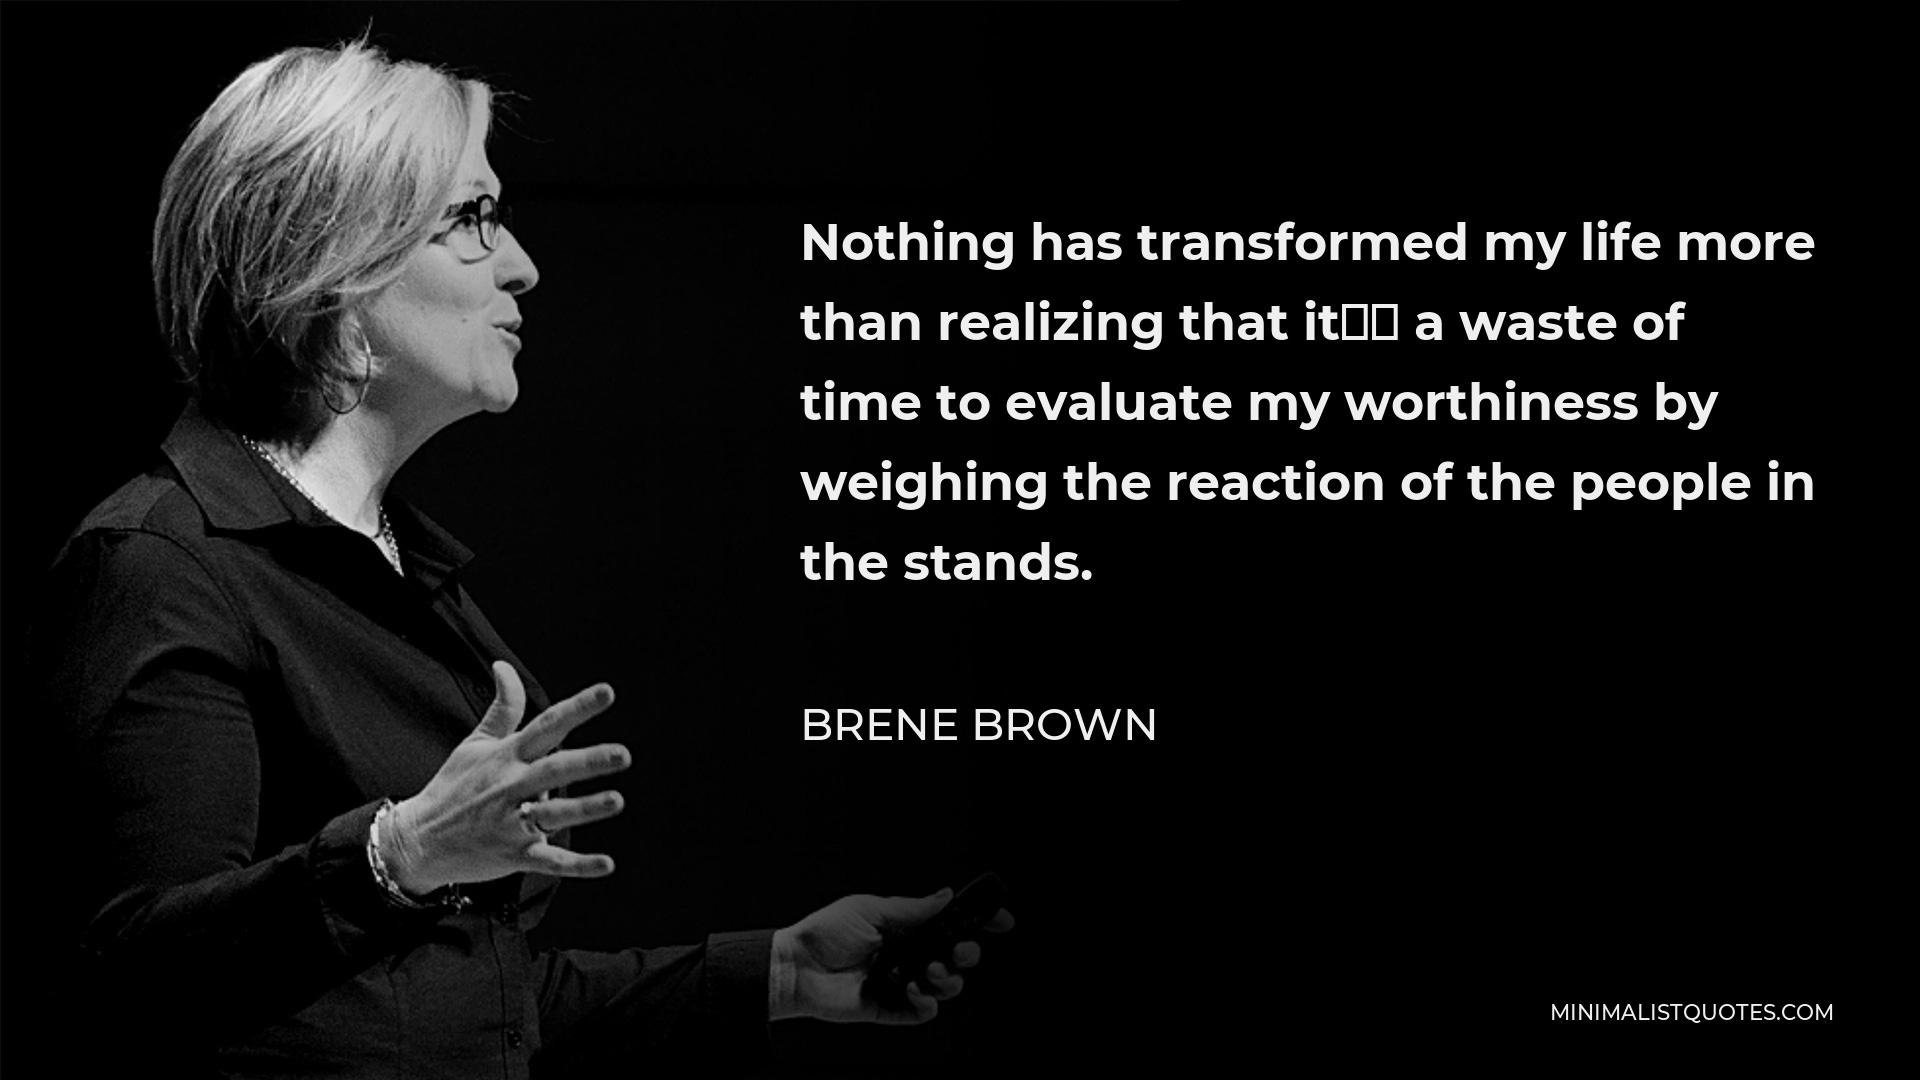 Brene Brown Quote - Nothing has transformed my life more than realizing that it’s a waste of time to evaluate my worthiness by weighing the reaction of the people in the stands.